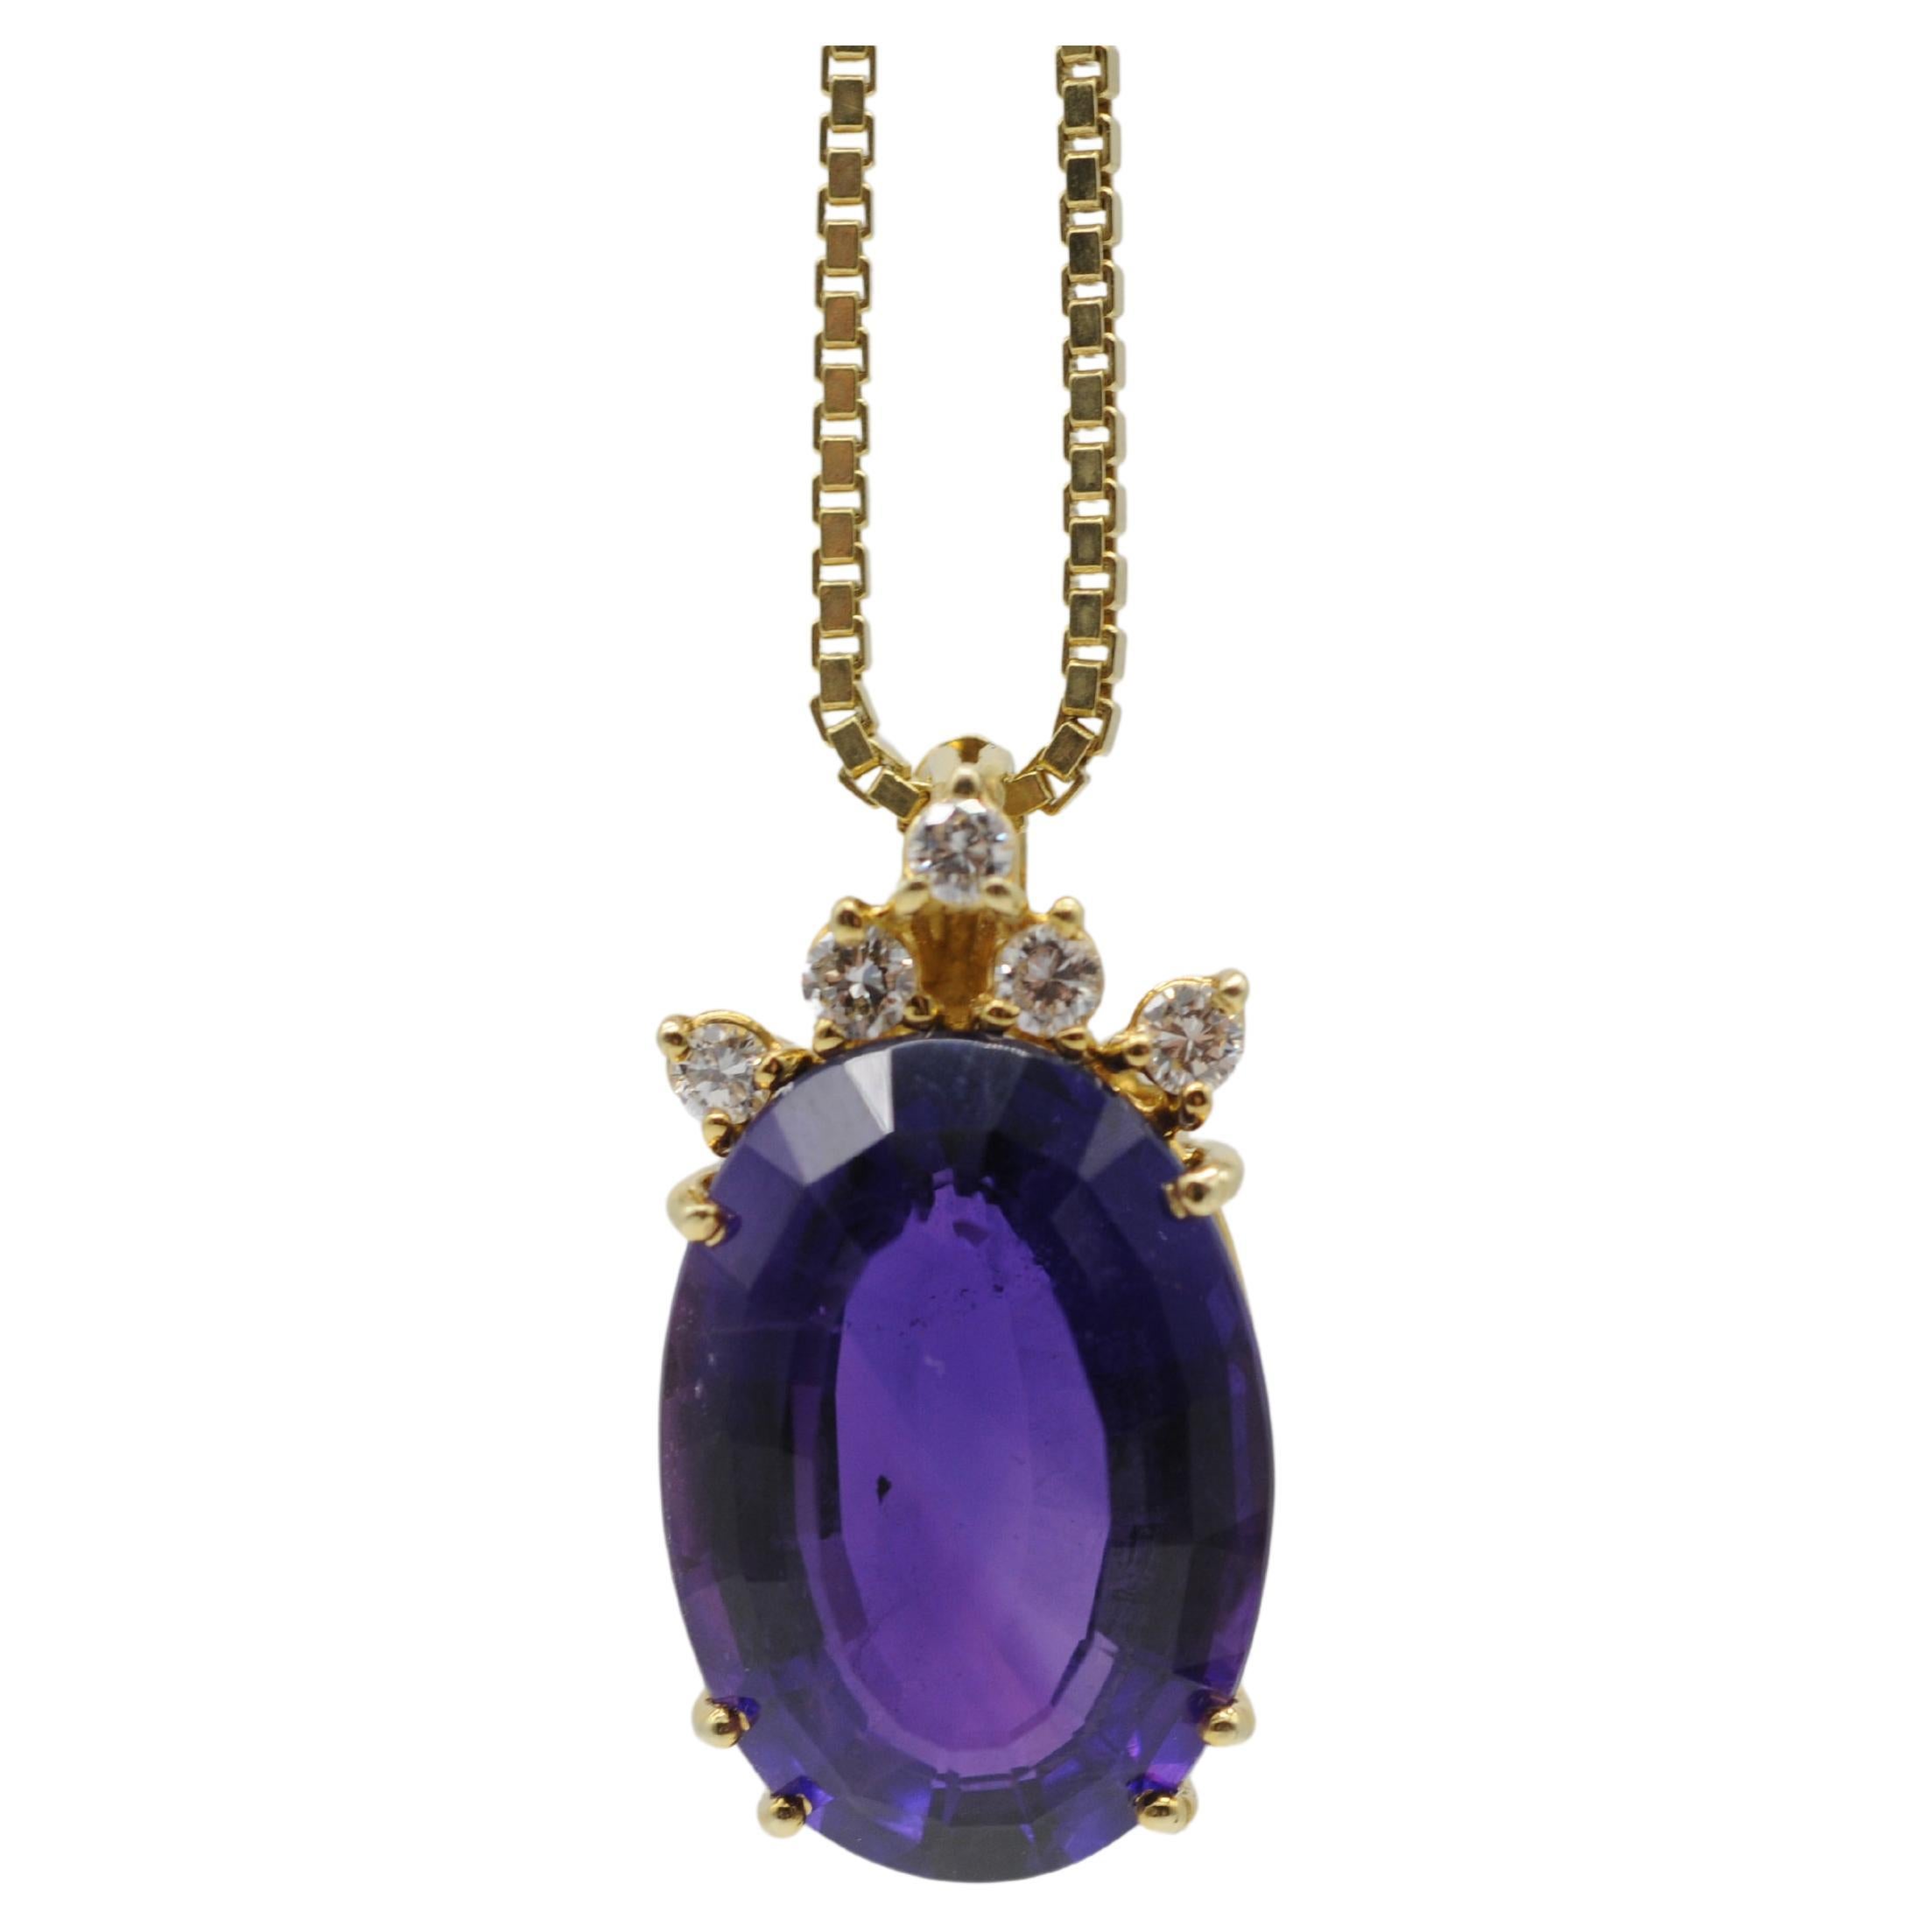 Immerse yourself in the enchanting beauty of this 14k yellow gold necklace featuring a magnificent pendant. The opulent centerpiece of this necklace is a stunning large amethyst, skillfully cut in an oval shape with a step-cut that bears a striking